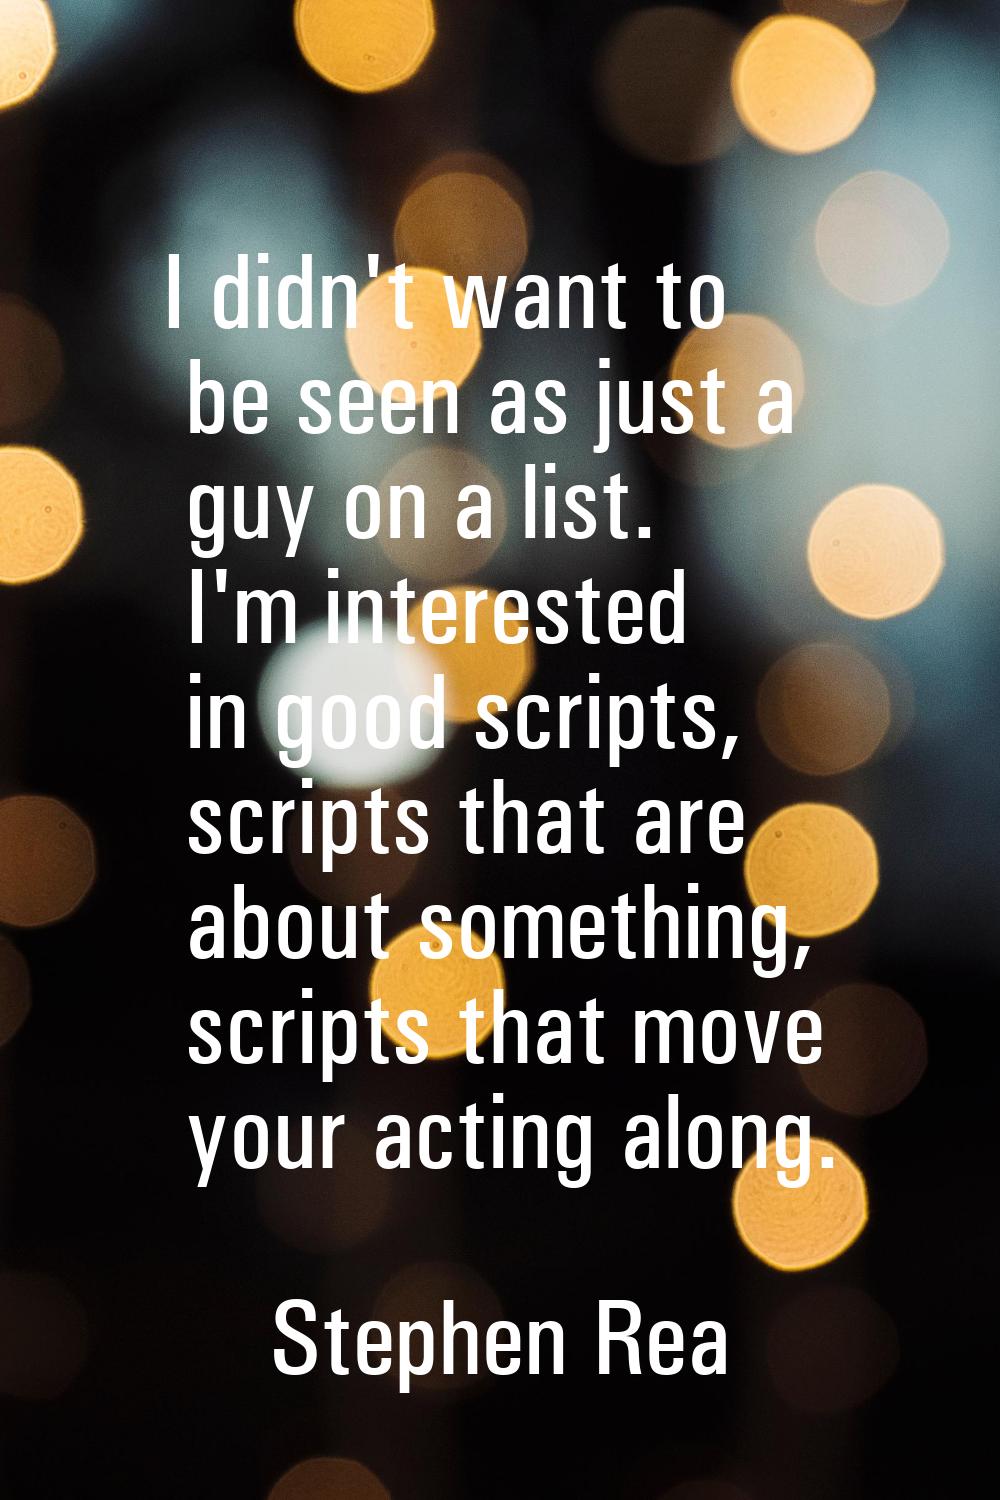 I didn't want to be seen as just a guy on a list. I'm interested in good scripts, scripts that are 